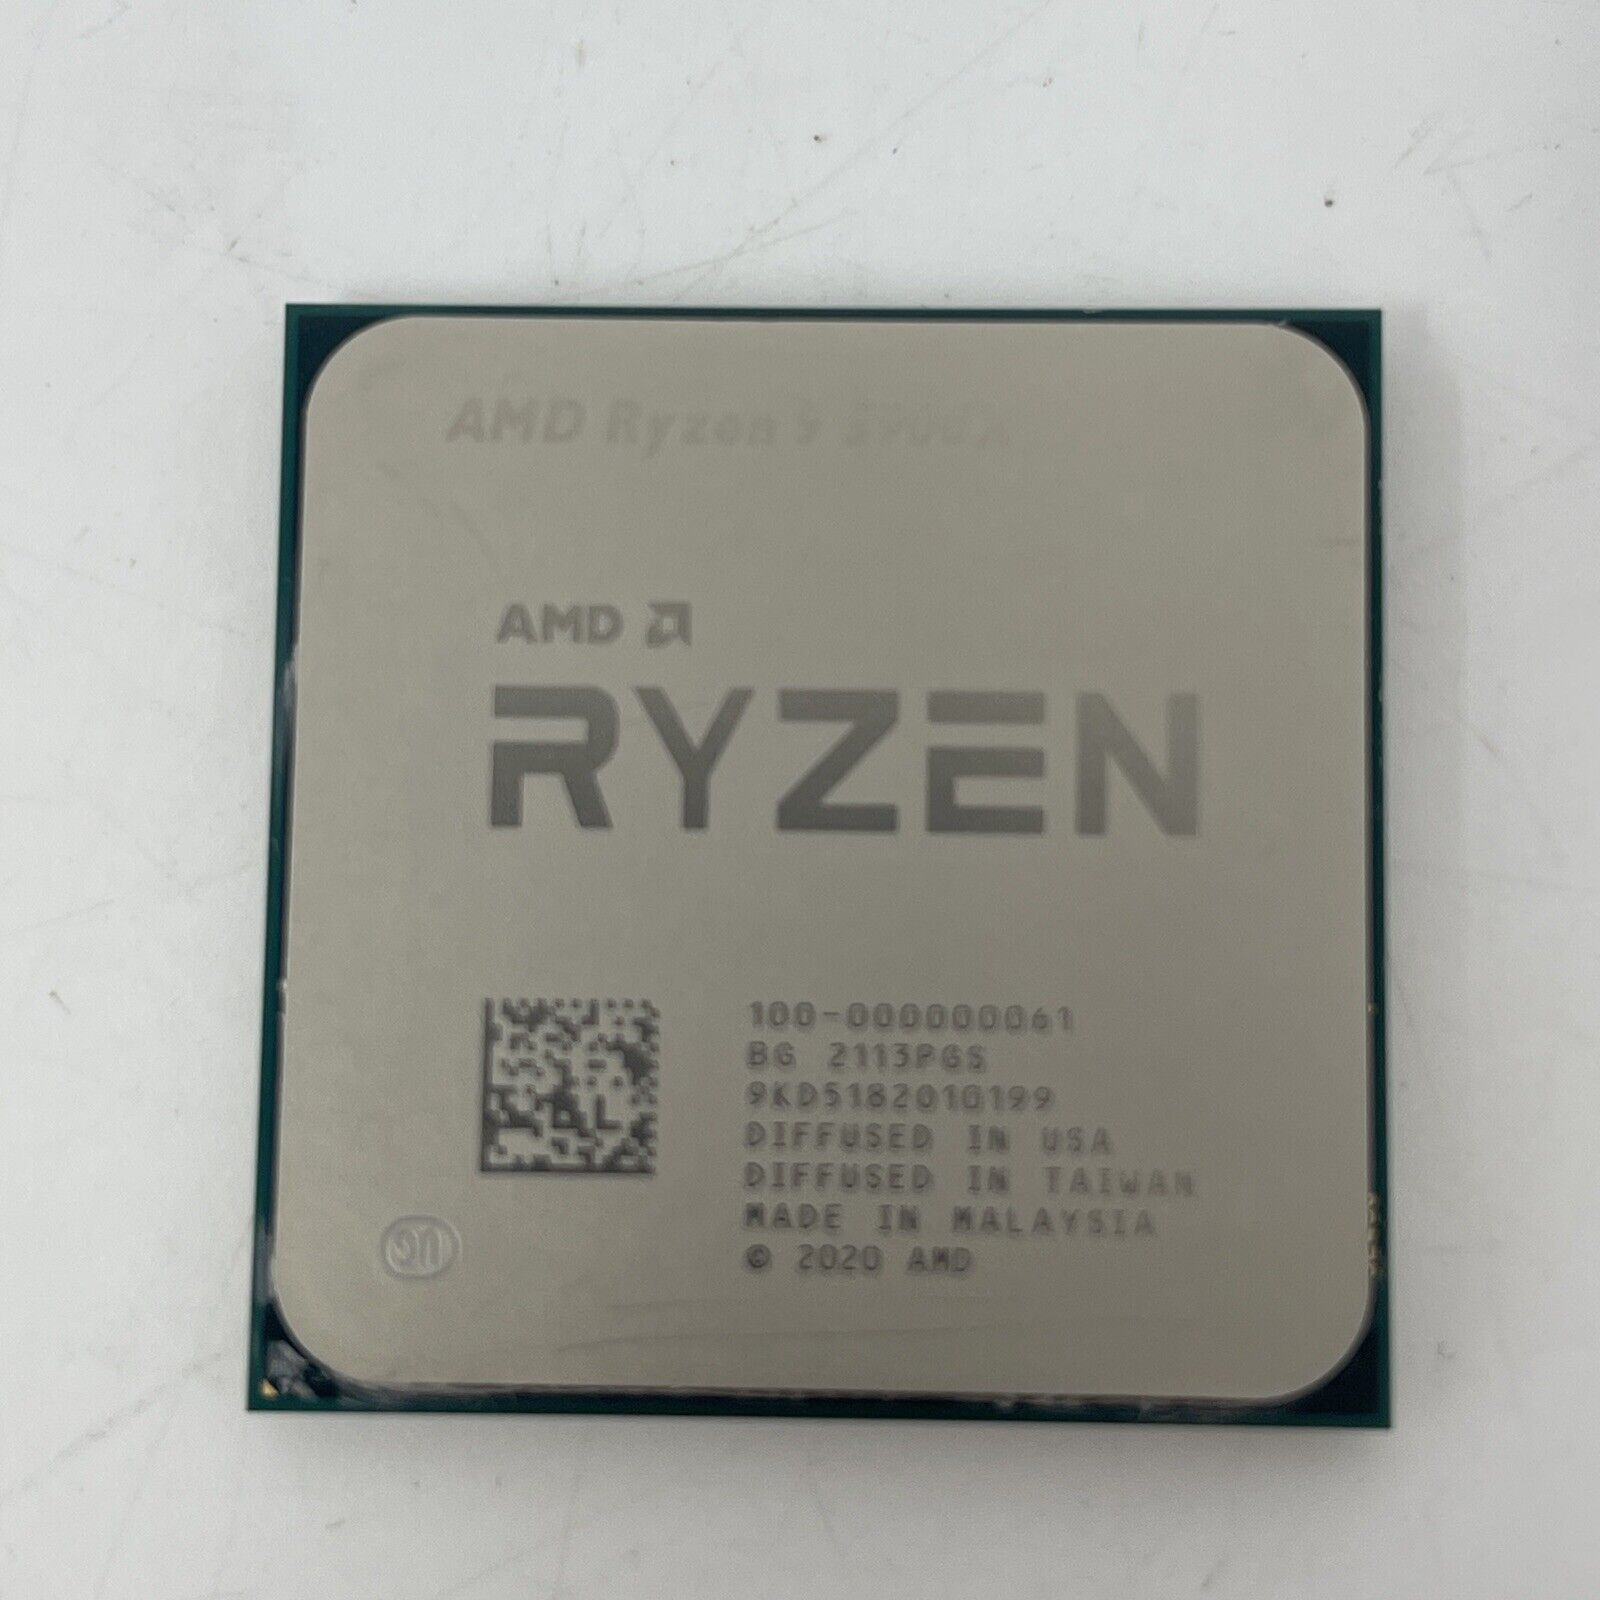 AMD Ryzen 9 5900X Desktop Processor AM4 CPU - Fully Tested And Working